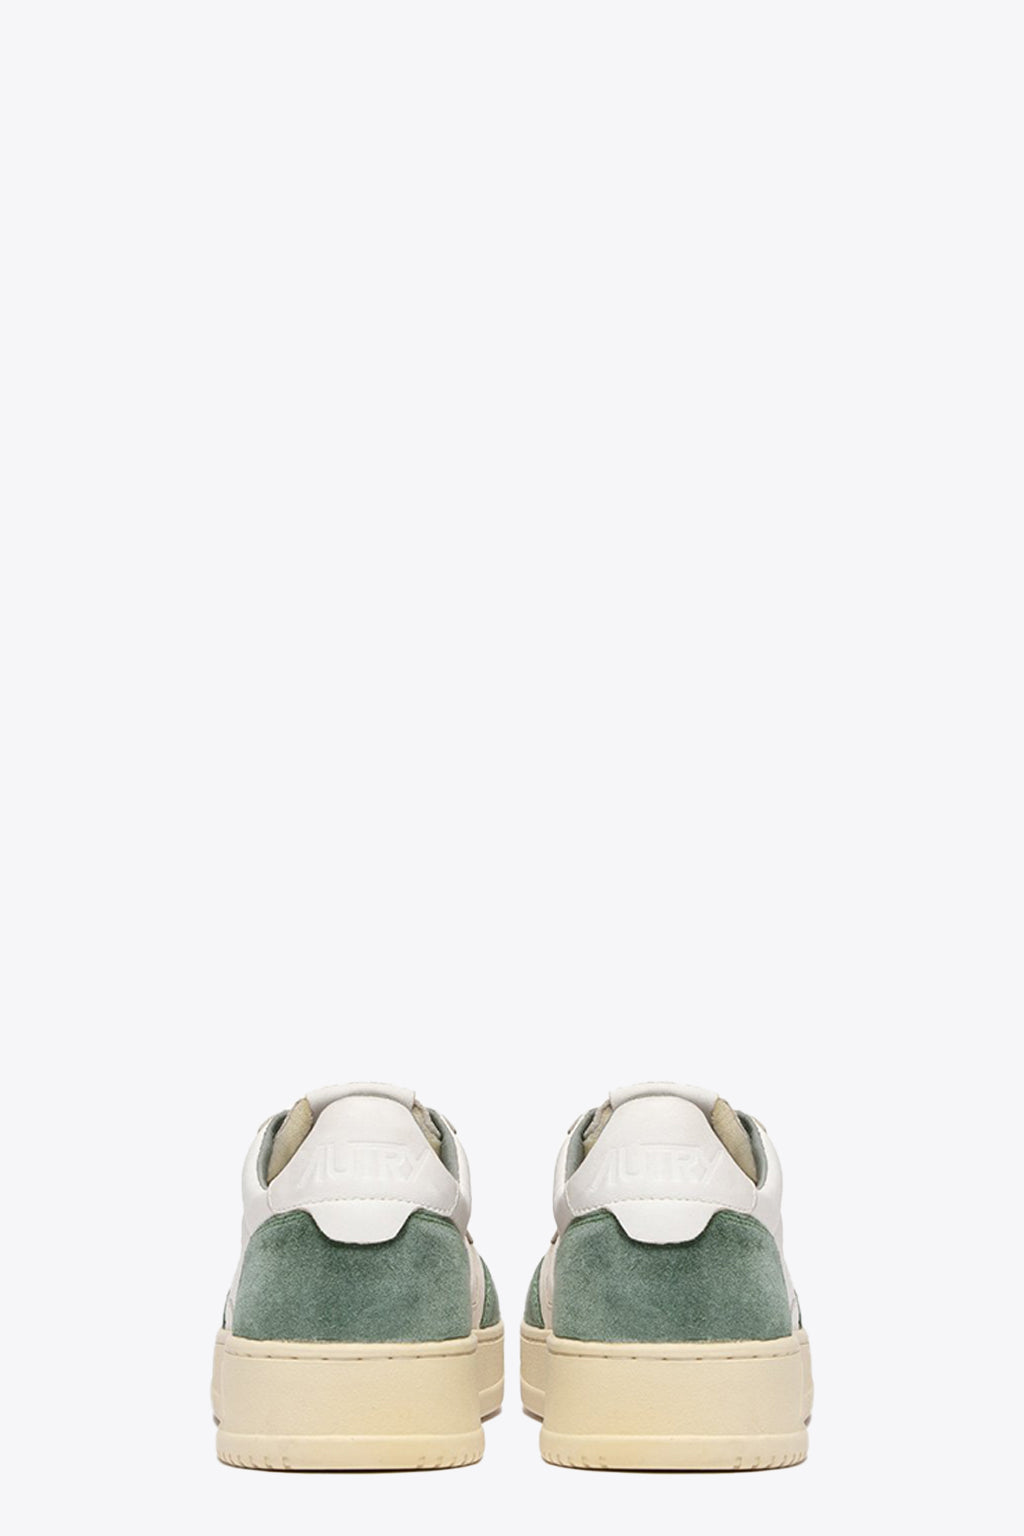 alt-image__White-leather-low-sneaker-with-green-suede-detail---Medalist